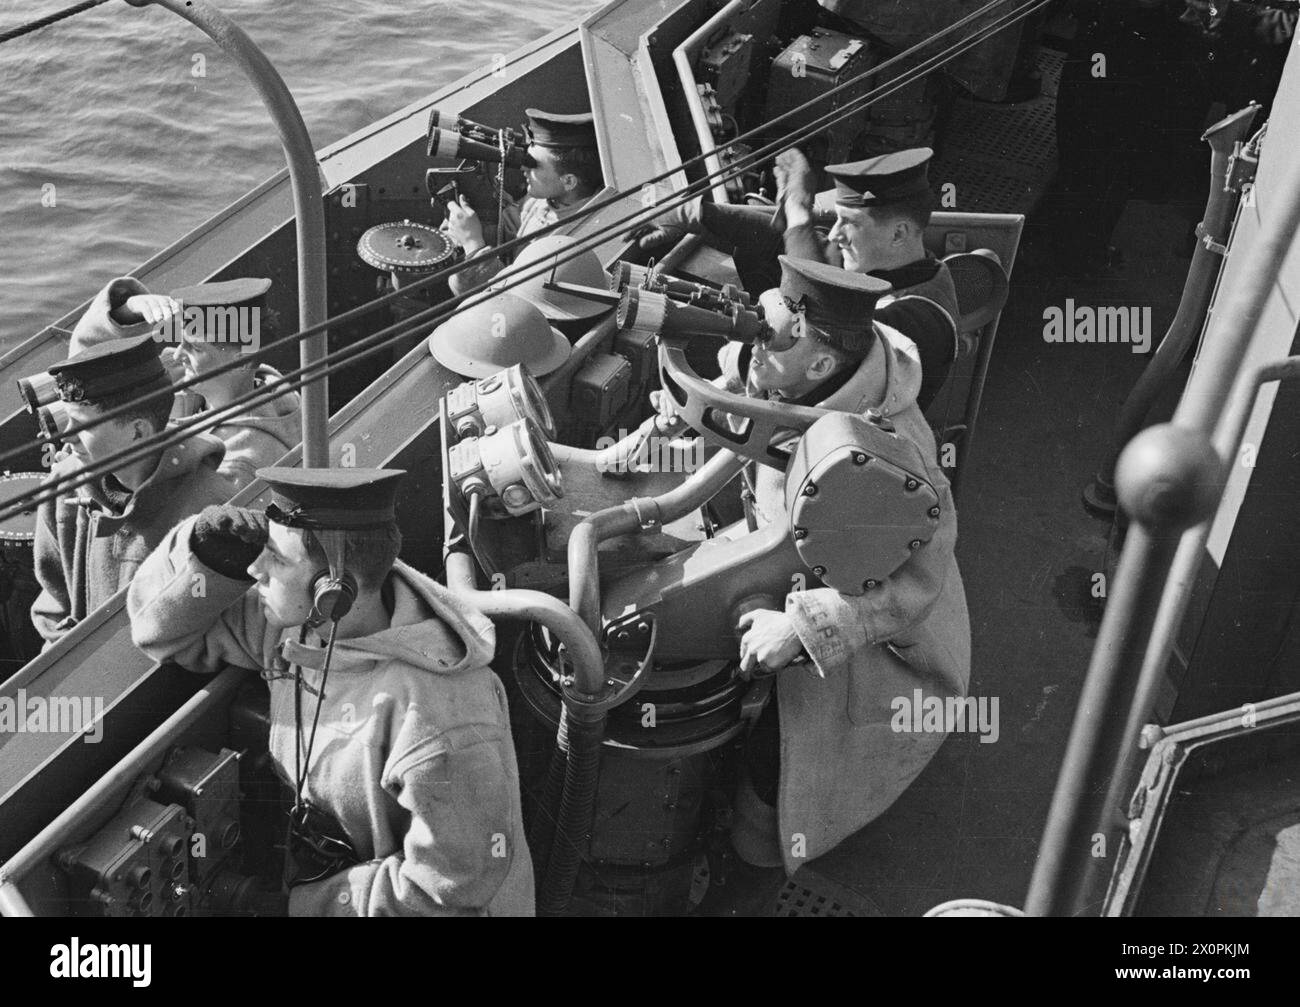 ON BOARD THE BATTLESHIP HMS PRINCE OF WALES. 1941. - The Captain on the ADP of HMS PRINCE OF WALES Stock Photo